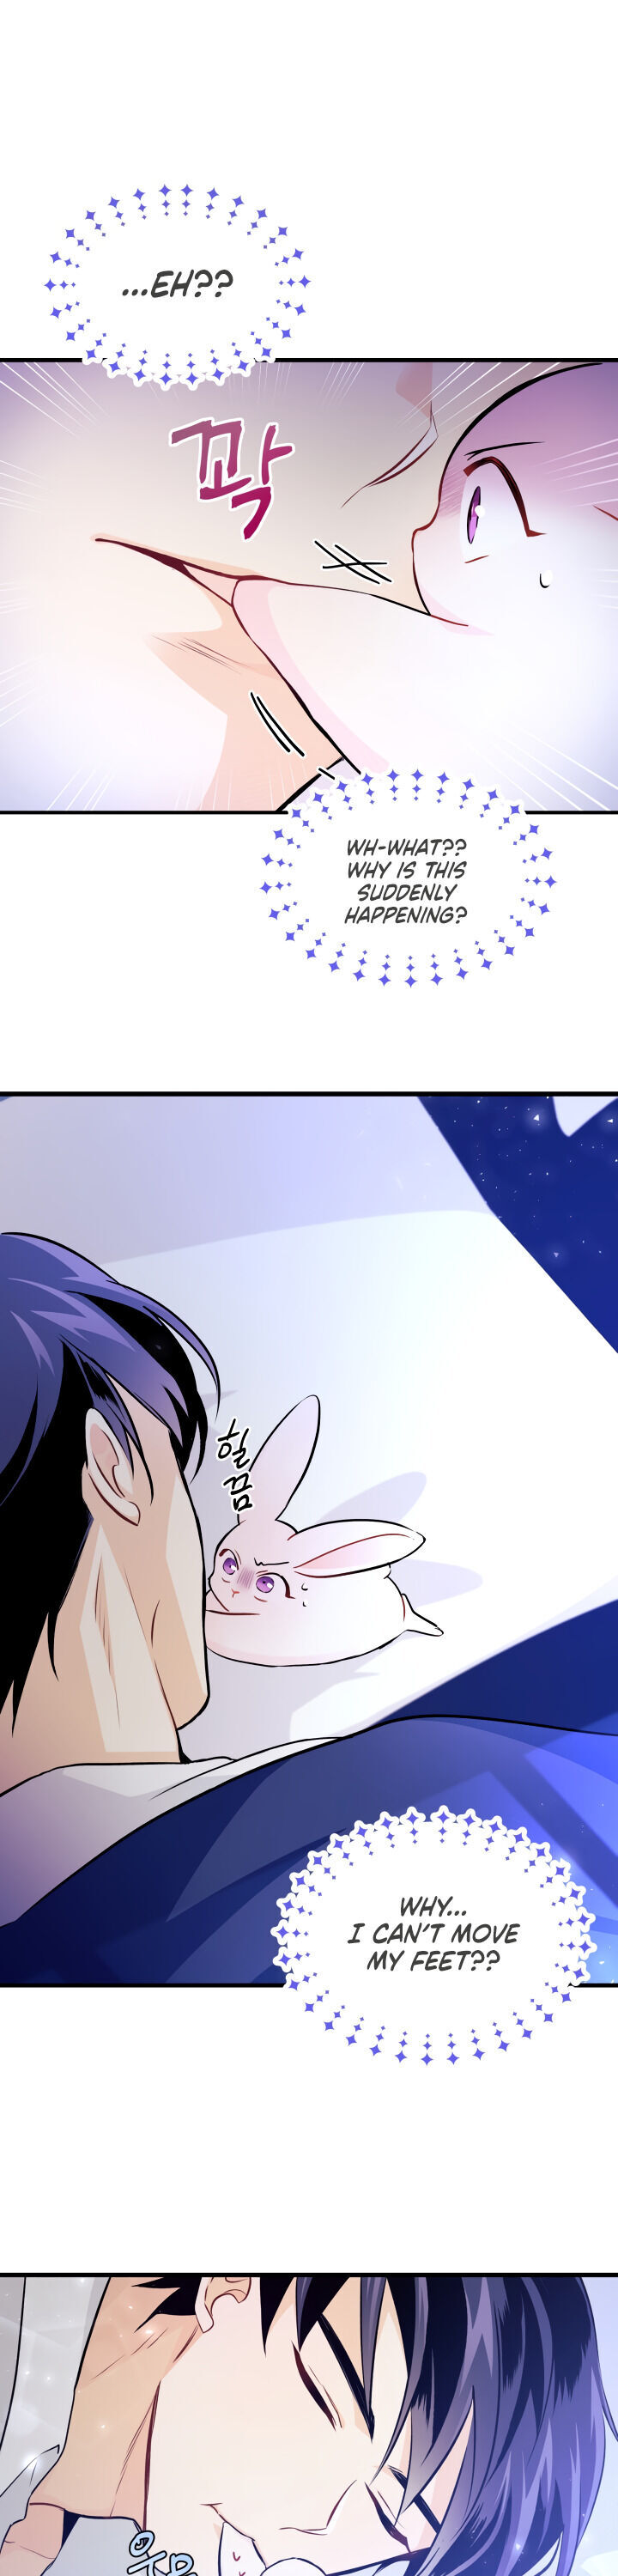 A Symbiotic Relationship Between A Rabbit And A Black Panther - Chapter 16 Page 17